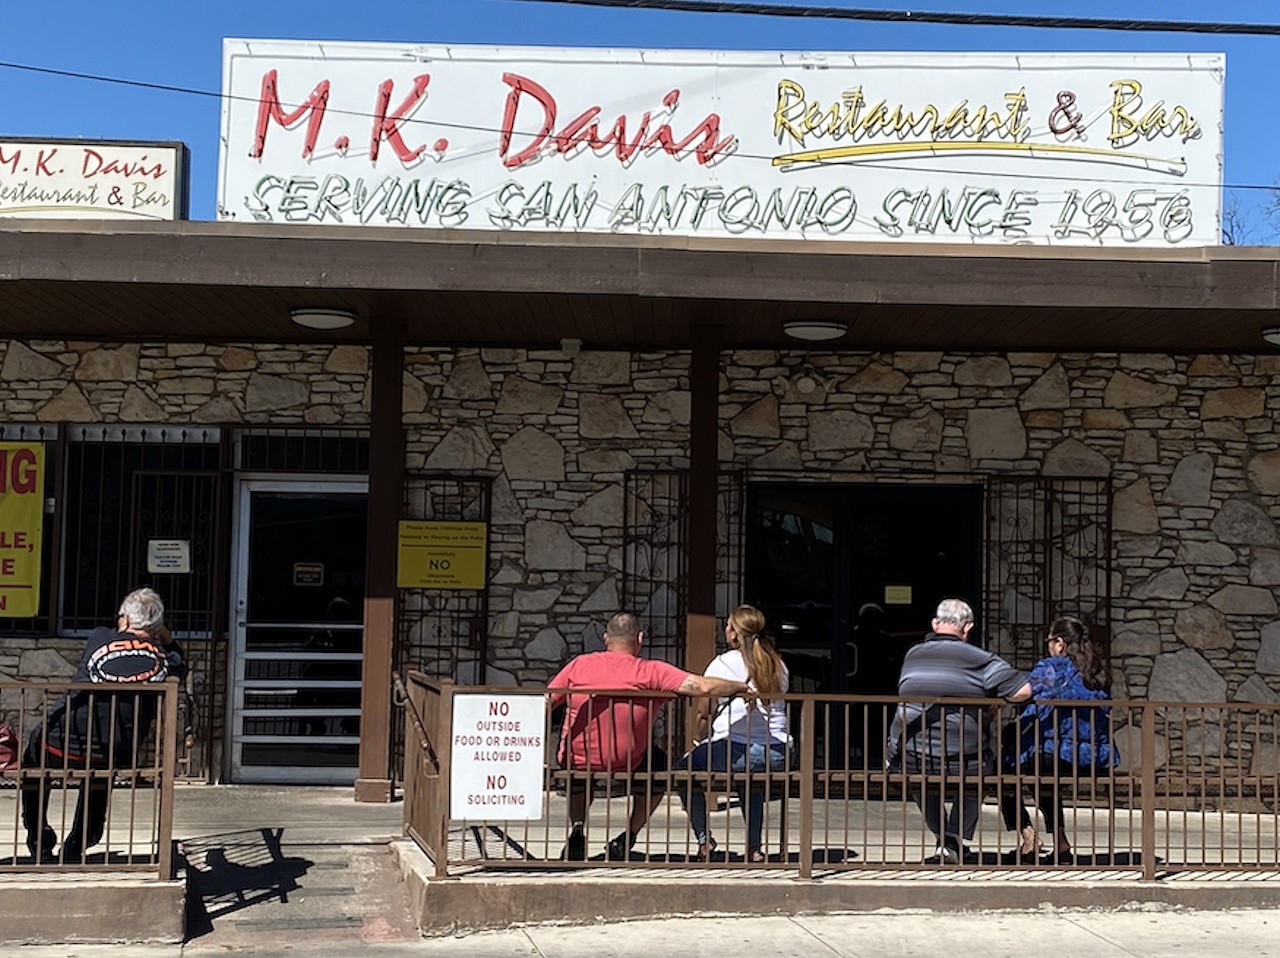 M.K. Davis Restaurant & Bar
1302 N. Flores St., (210) 223-1208, facebook.com/mkdavisrestaurant
This family-owned restaurant specializes in serving up steaks, seafood and Mexican food to hungry San Antonians. What started in 1956 as some picnic tables and ice-cold beers is now a San Antonio classic with both food and an atmosphere that remains true to the restaurant’s family roots.